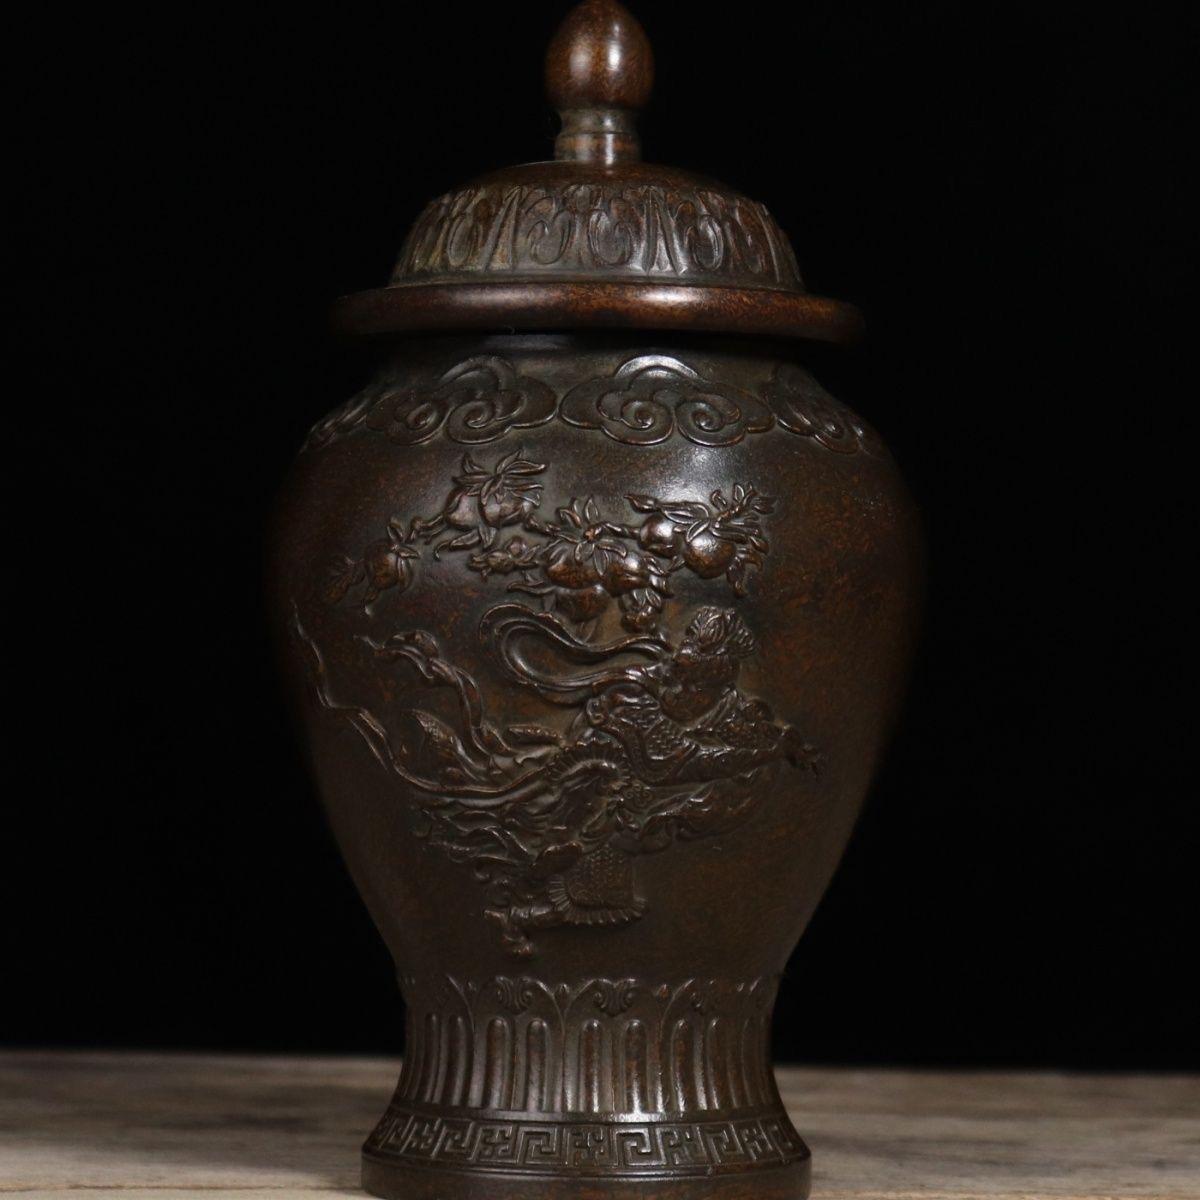 This old Chinese Bronze General Jar with famous story of Monkey Sun sending peaches, the mark on the bottom Xuan means it was made in Qing dynasty Xuan Tong period, nice condition, good for decoration and collection.

Details:
Material: